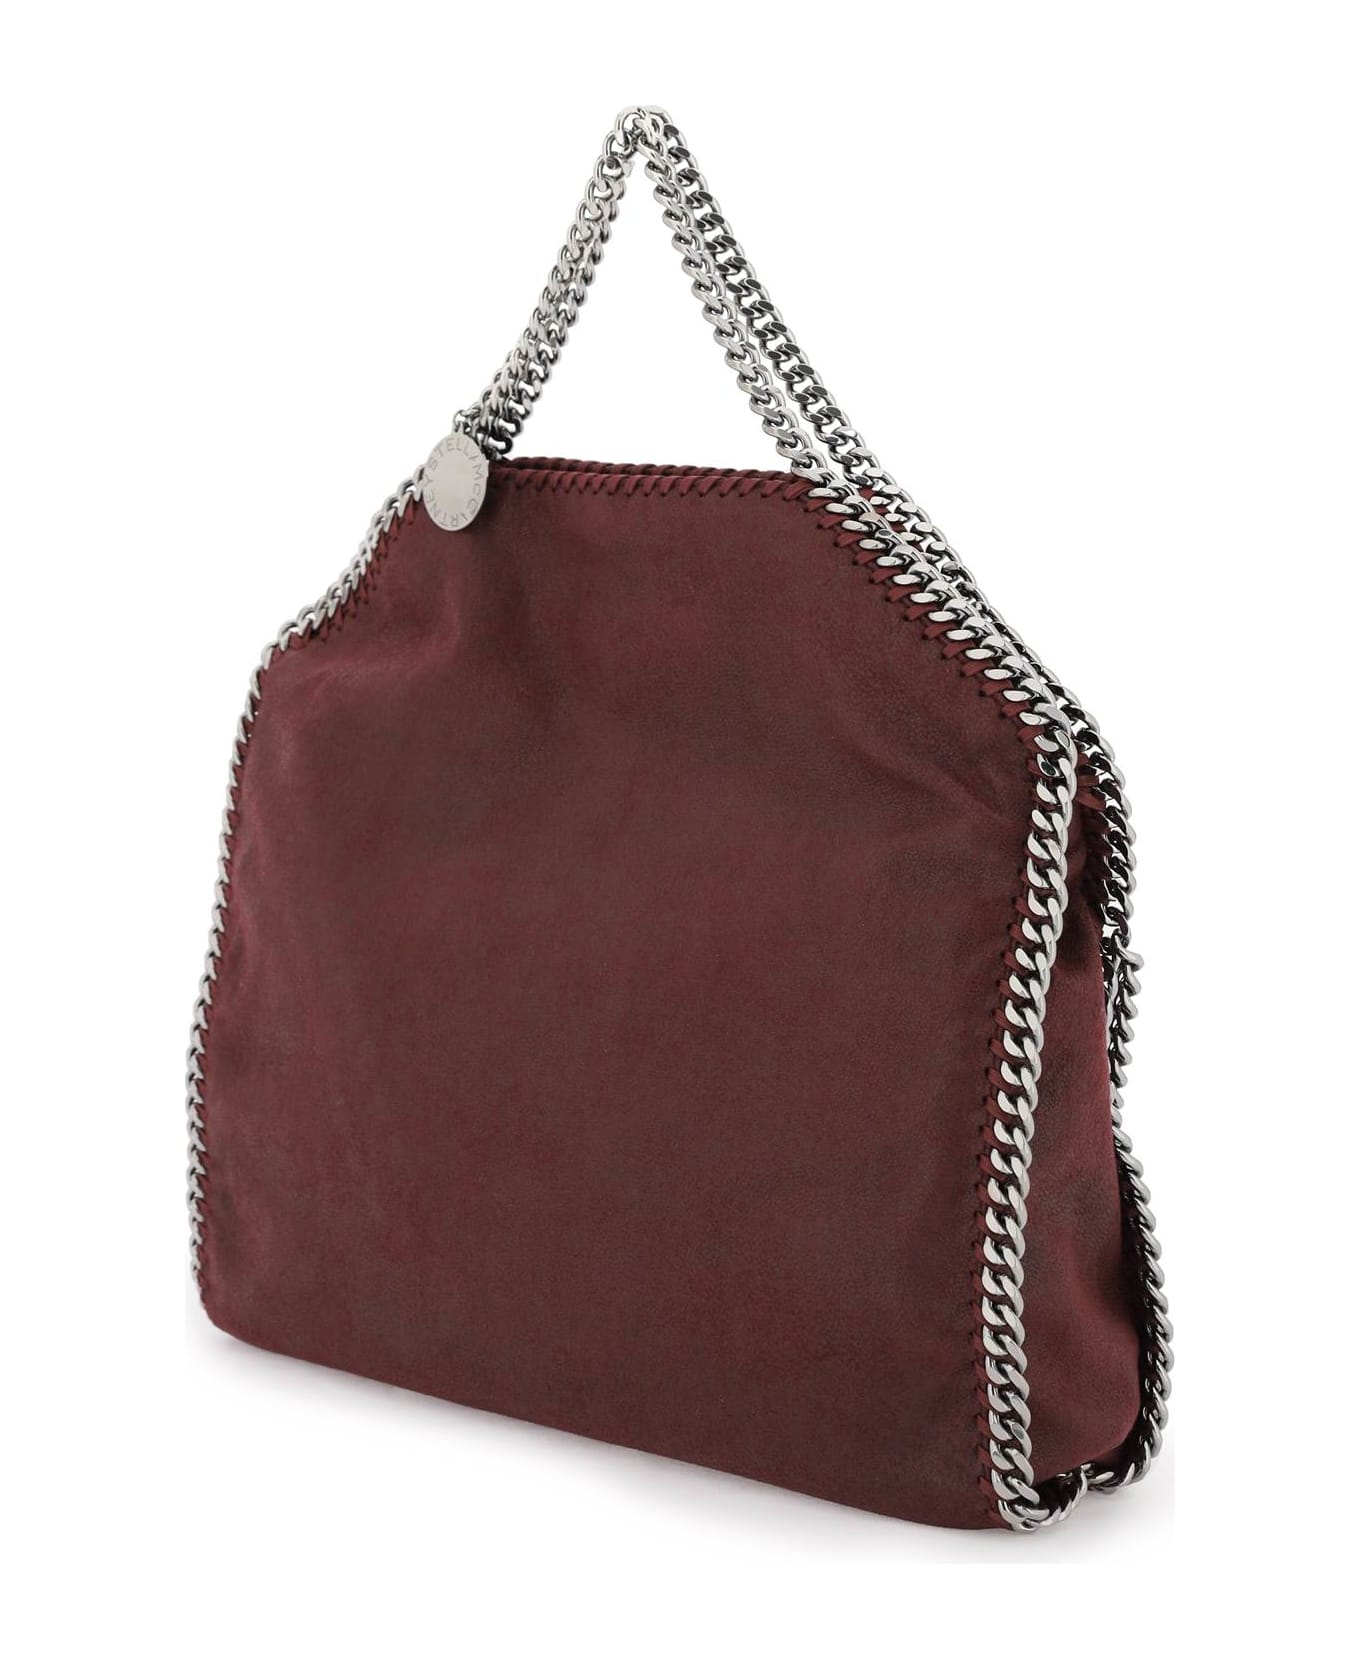 Stella McCartney Falabella Fold Over Tote Bag - Red トートバッグ